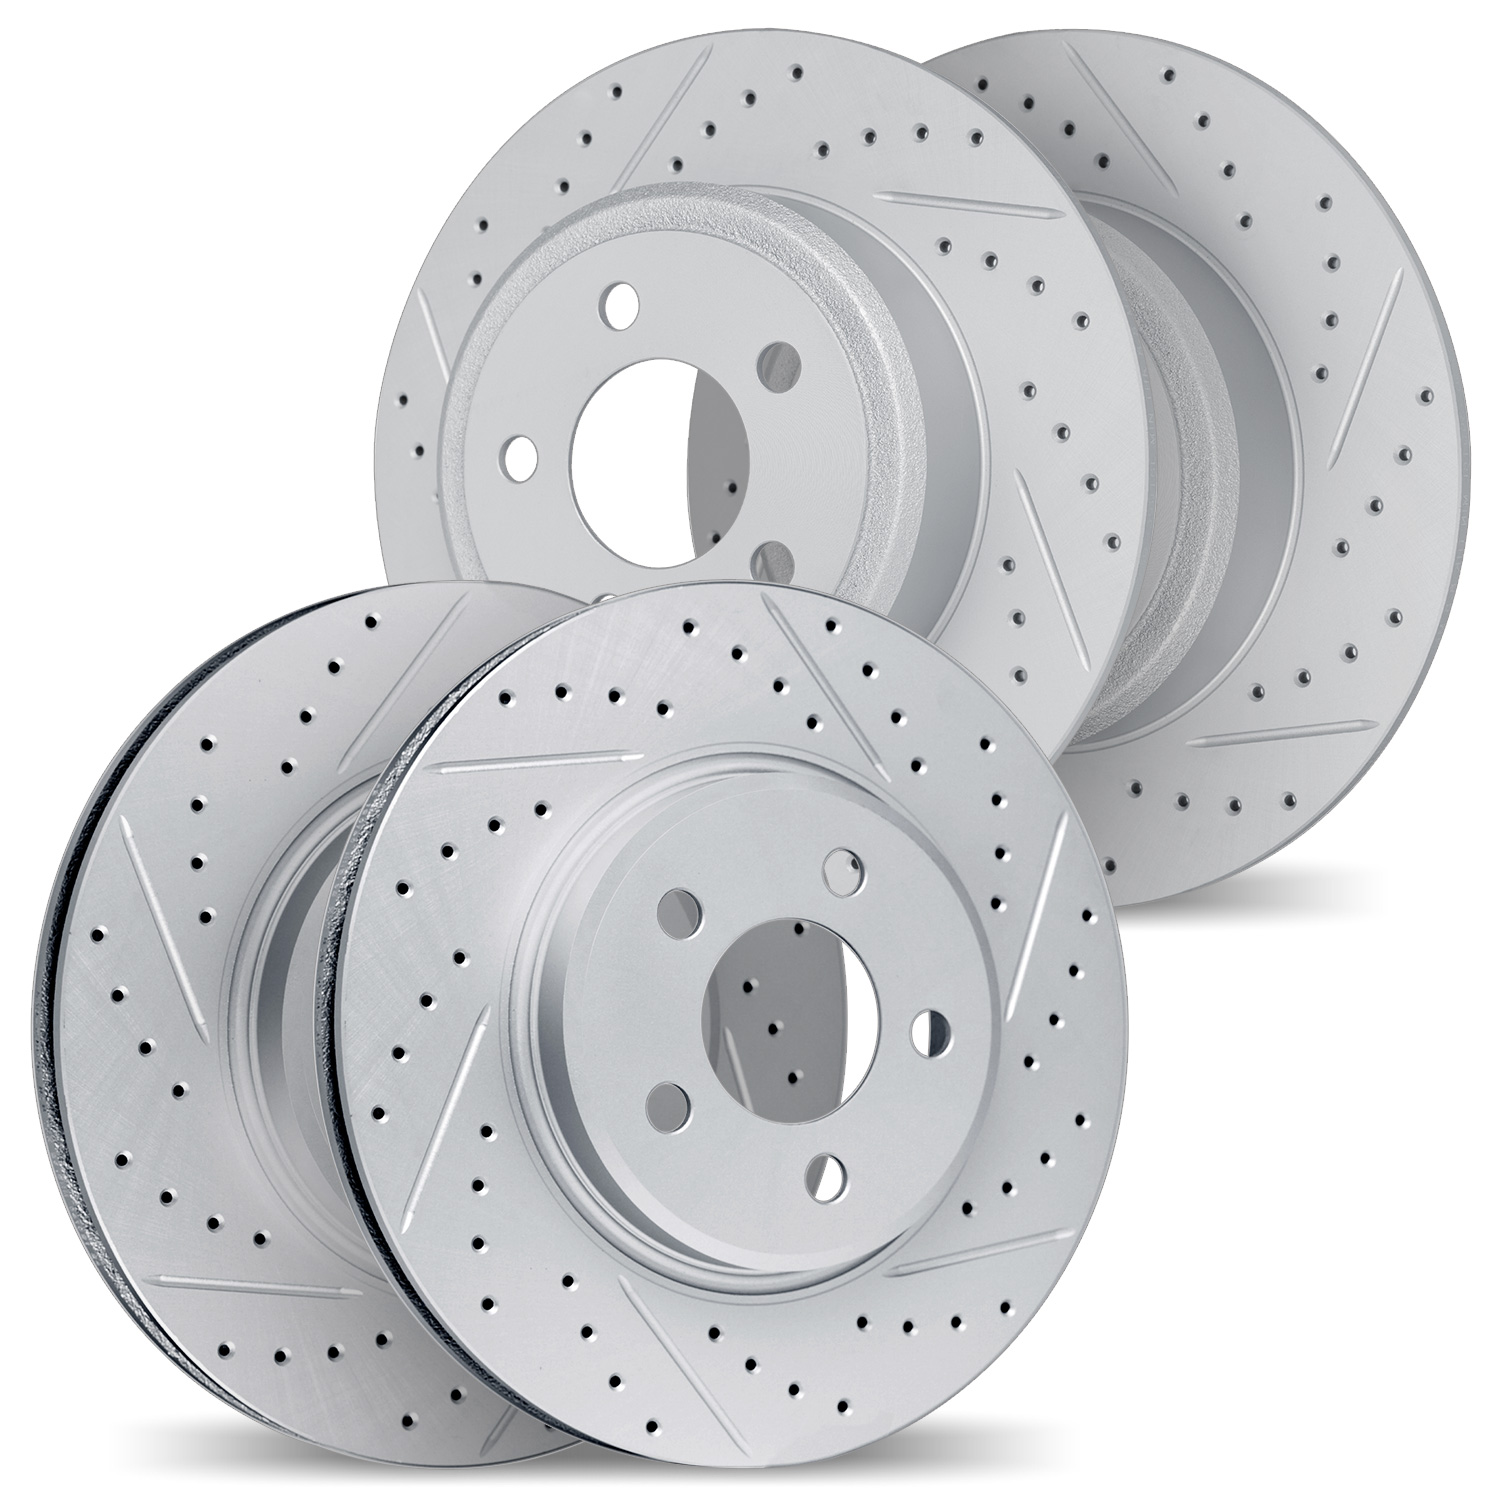 2004-74003 Geoperformance Drilled/Slotted Brake Rotors, 2010-2019 Audi/Volkswagen, Position: Front and Rear